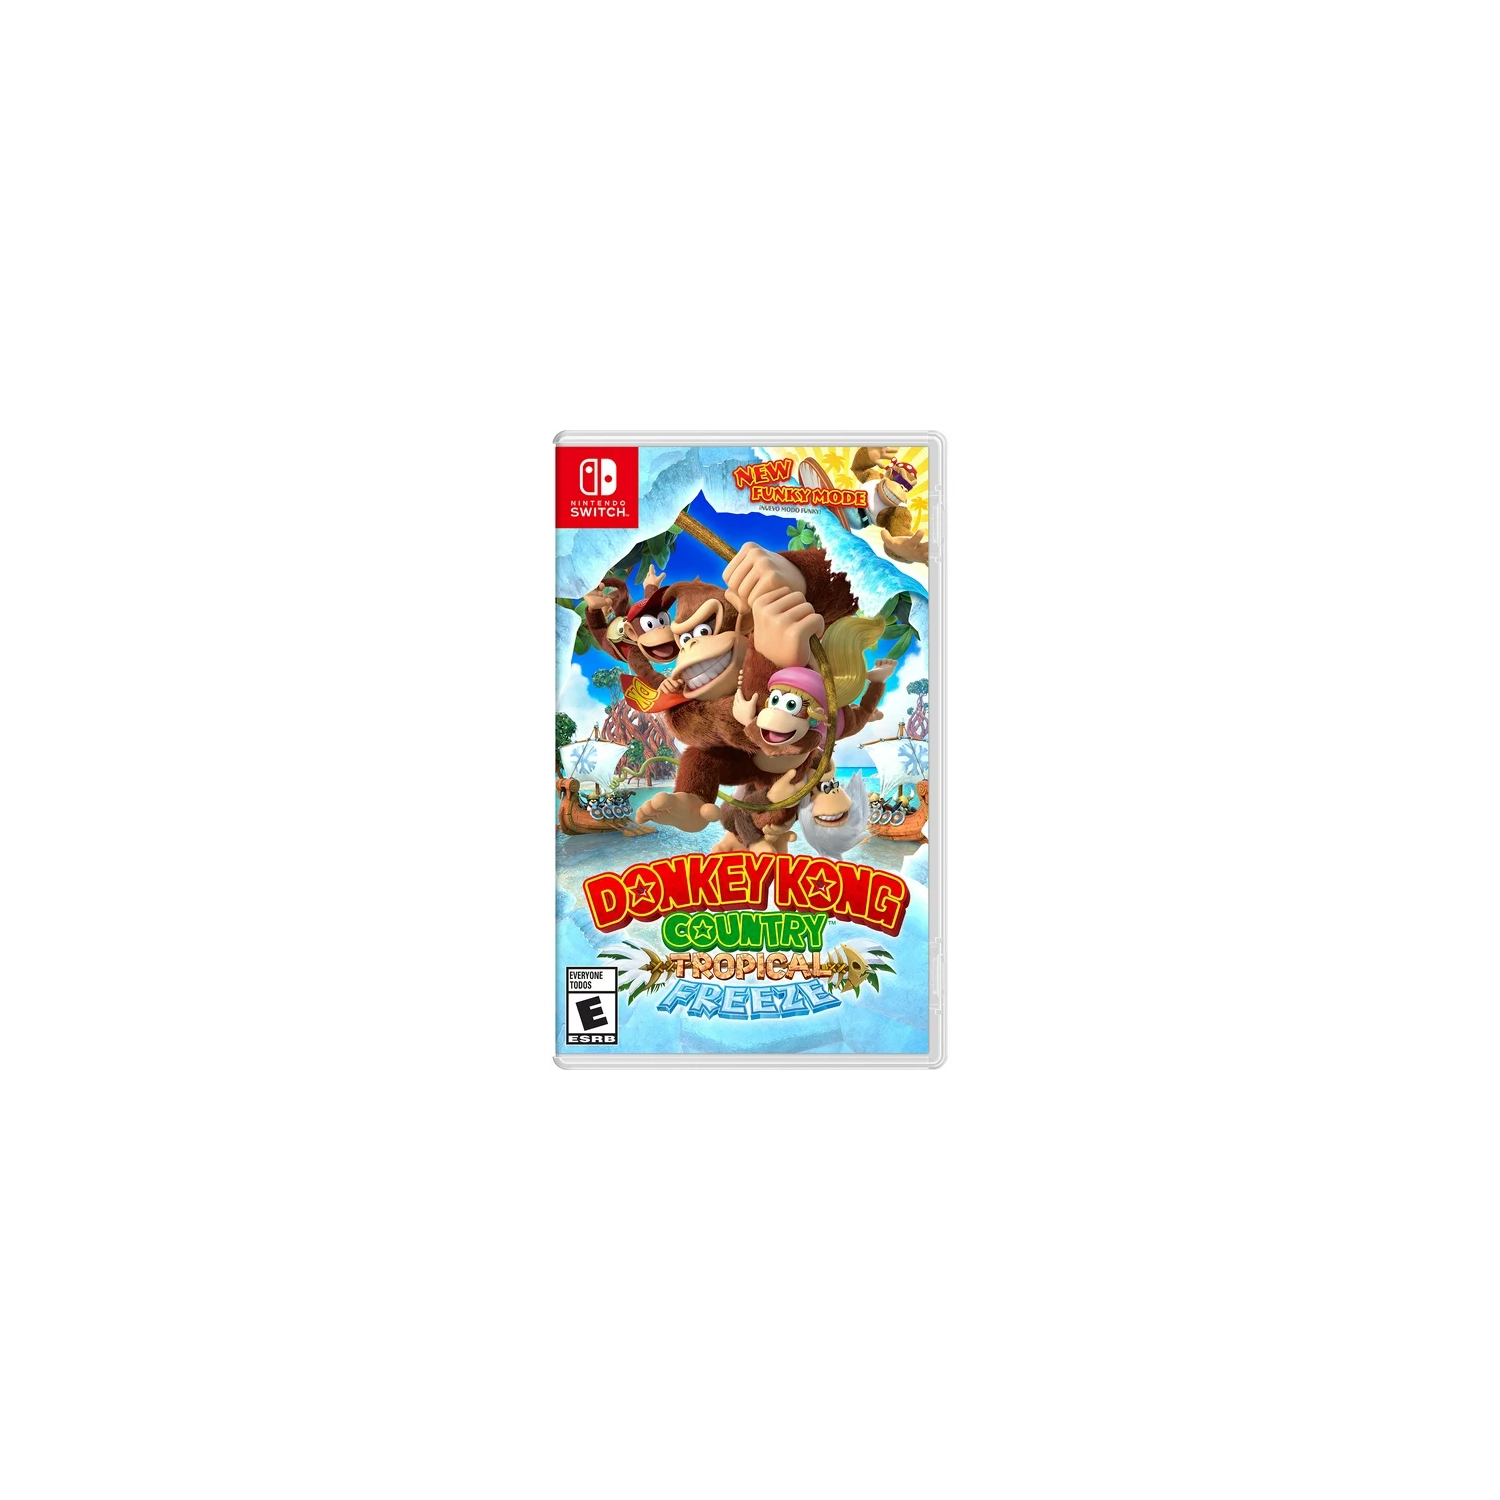 Donkey Kong Country: Tropical Freeze for Nintendo Switch [VIDEOGAMES]